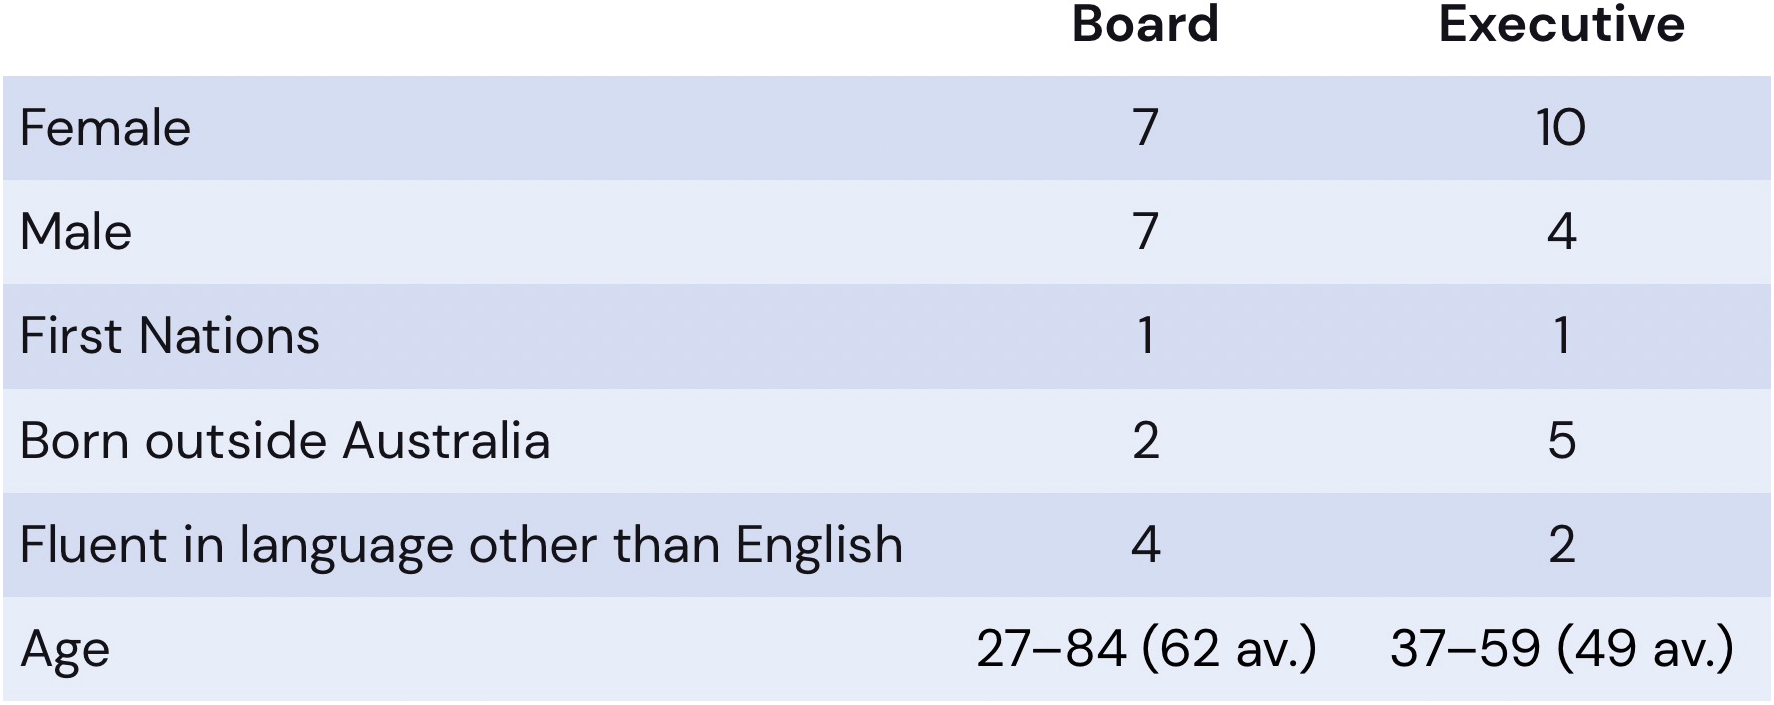 A table showing the number of people in Board and Executive positions across a range of diversity categories.